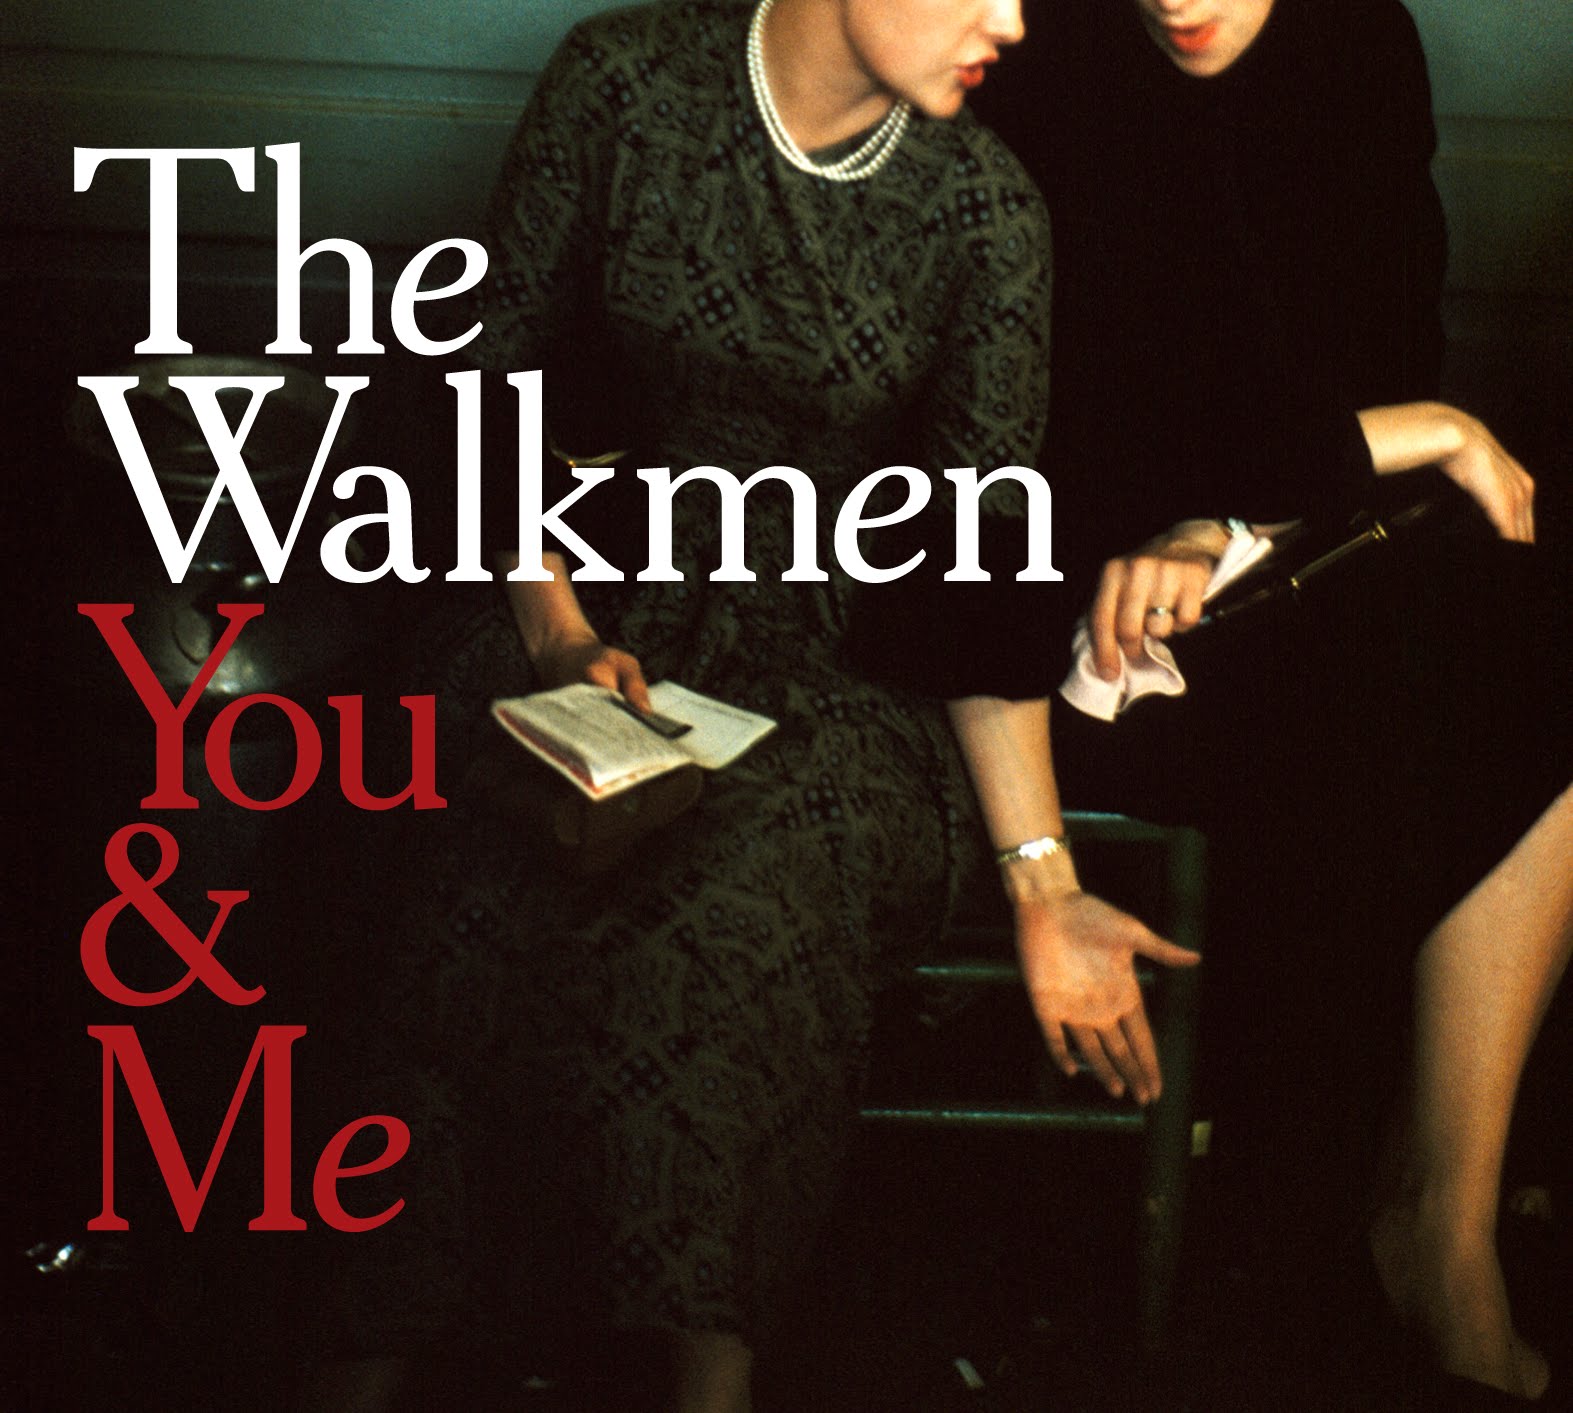 The Walkmen's You & Me is out now.